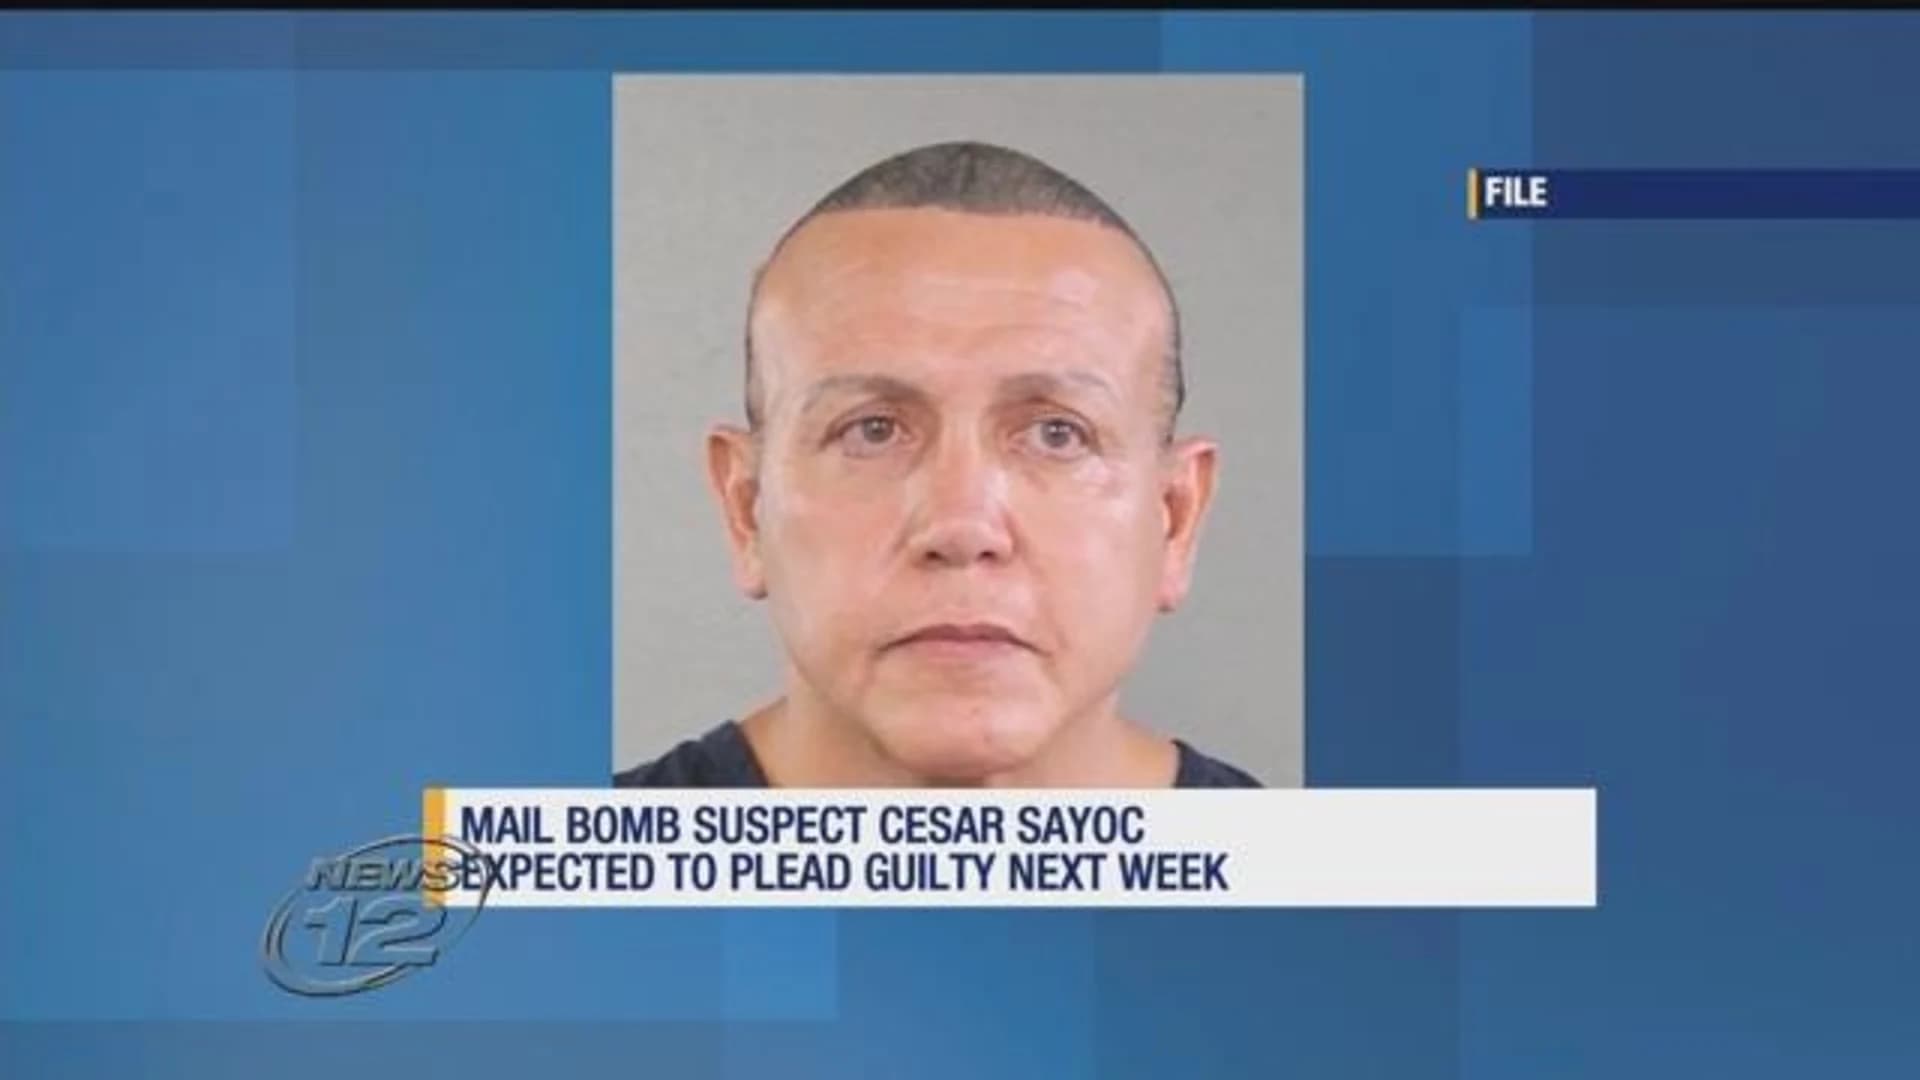 Florida man charged with sending pipe bombs to Democrats expected to plead guilty